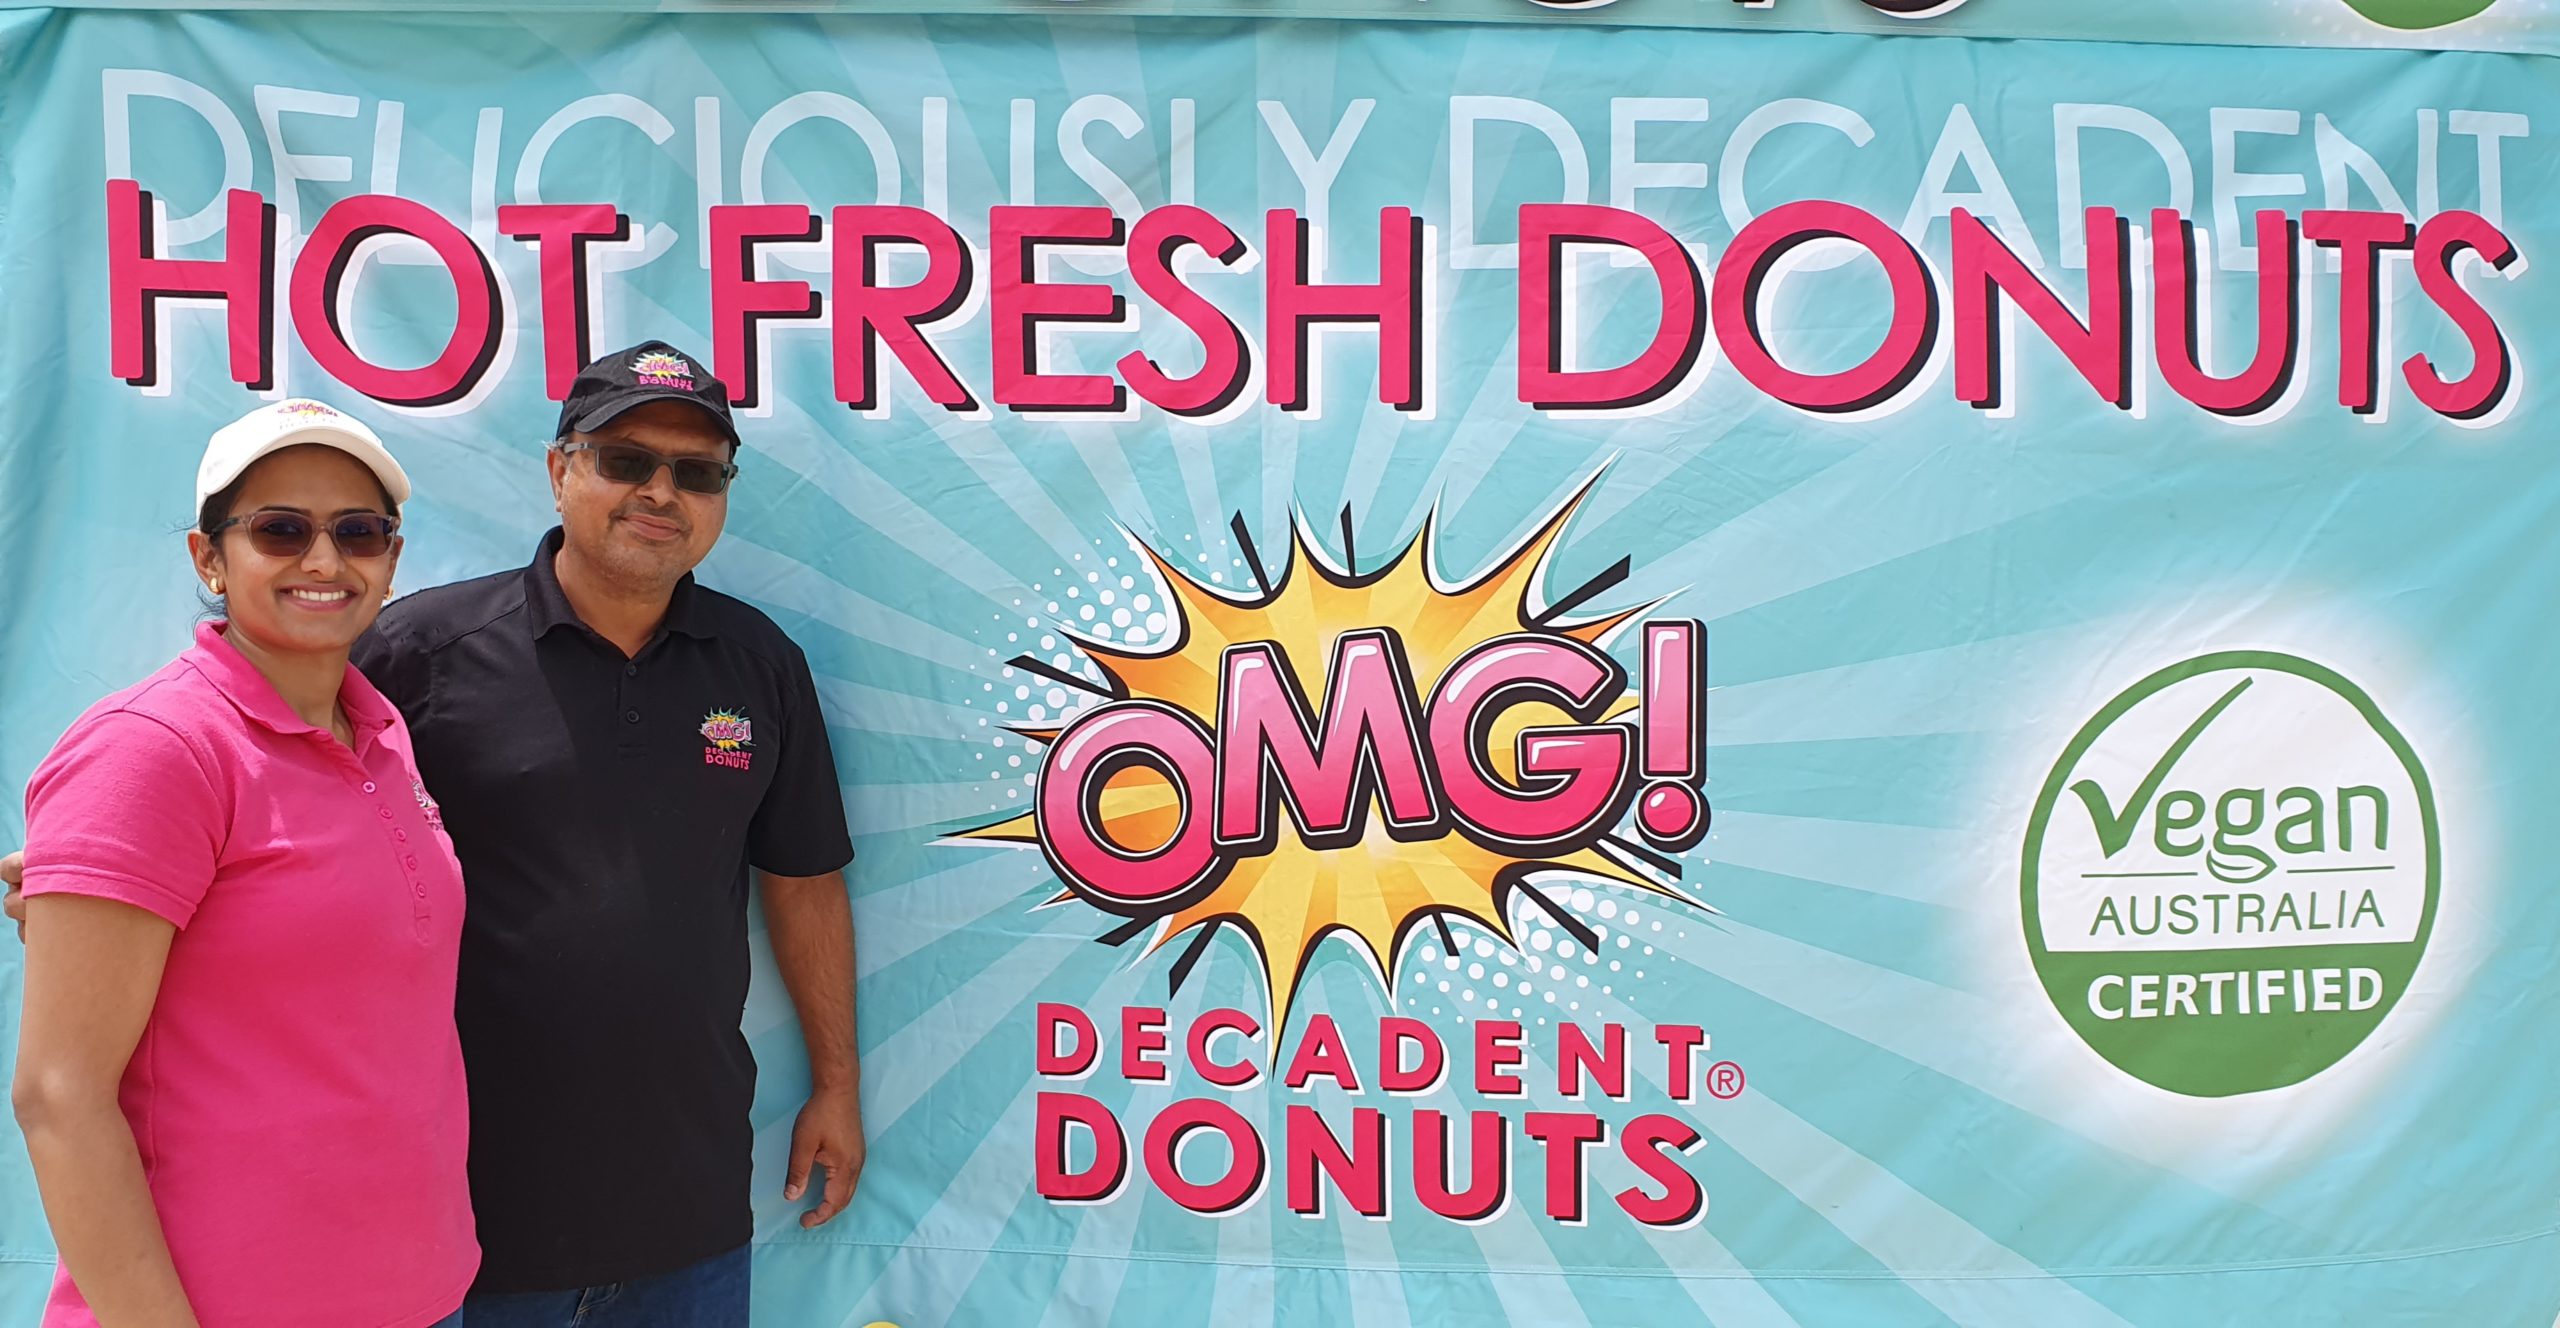 Hot Fresh Yummy Donuts that are Gluten free and Vegan - that everyone loves!